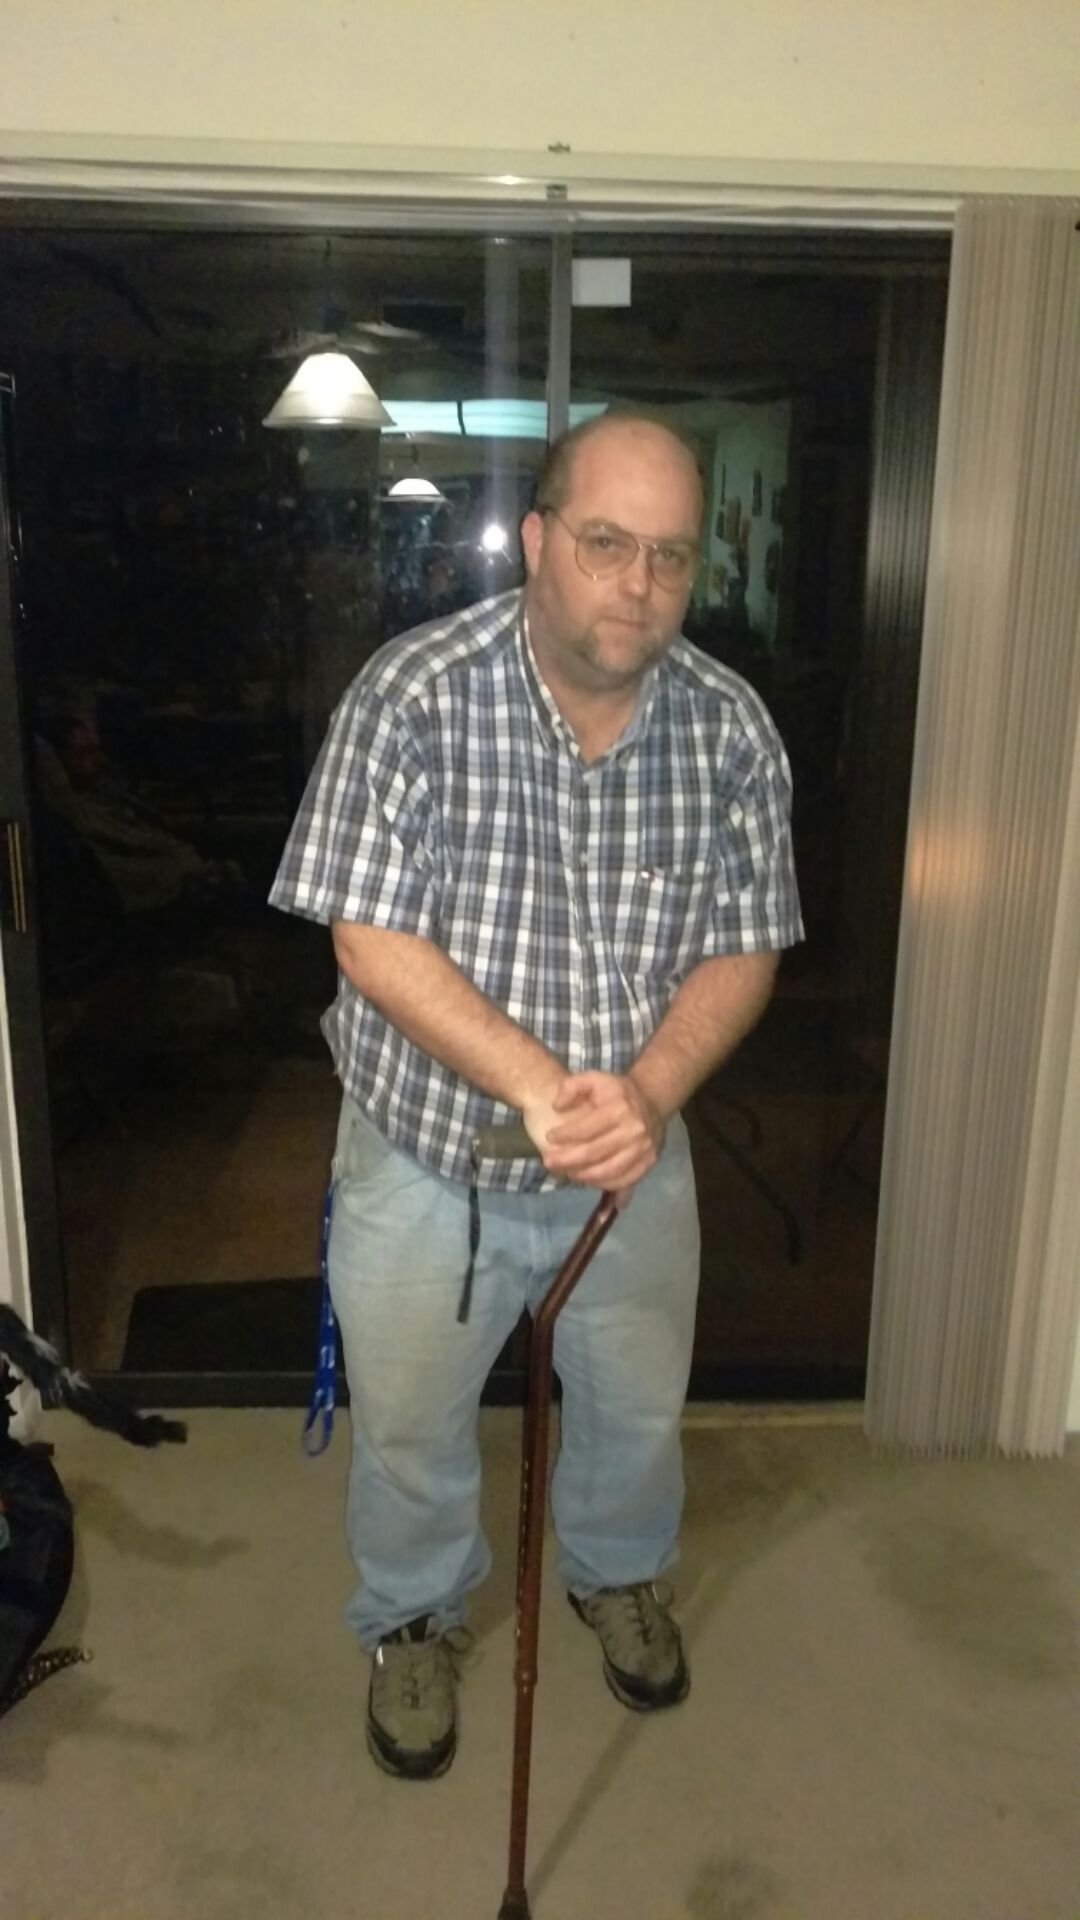 My friend barely had to do anything for this Halloween costume... All he needed was the cane.